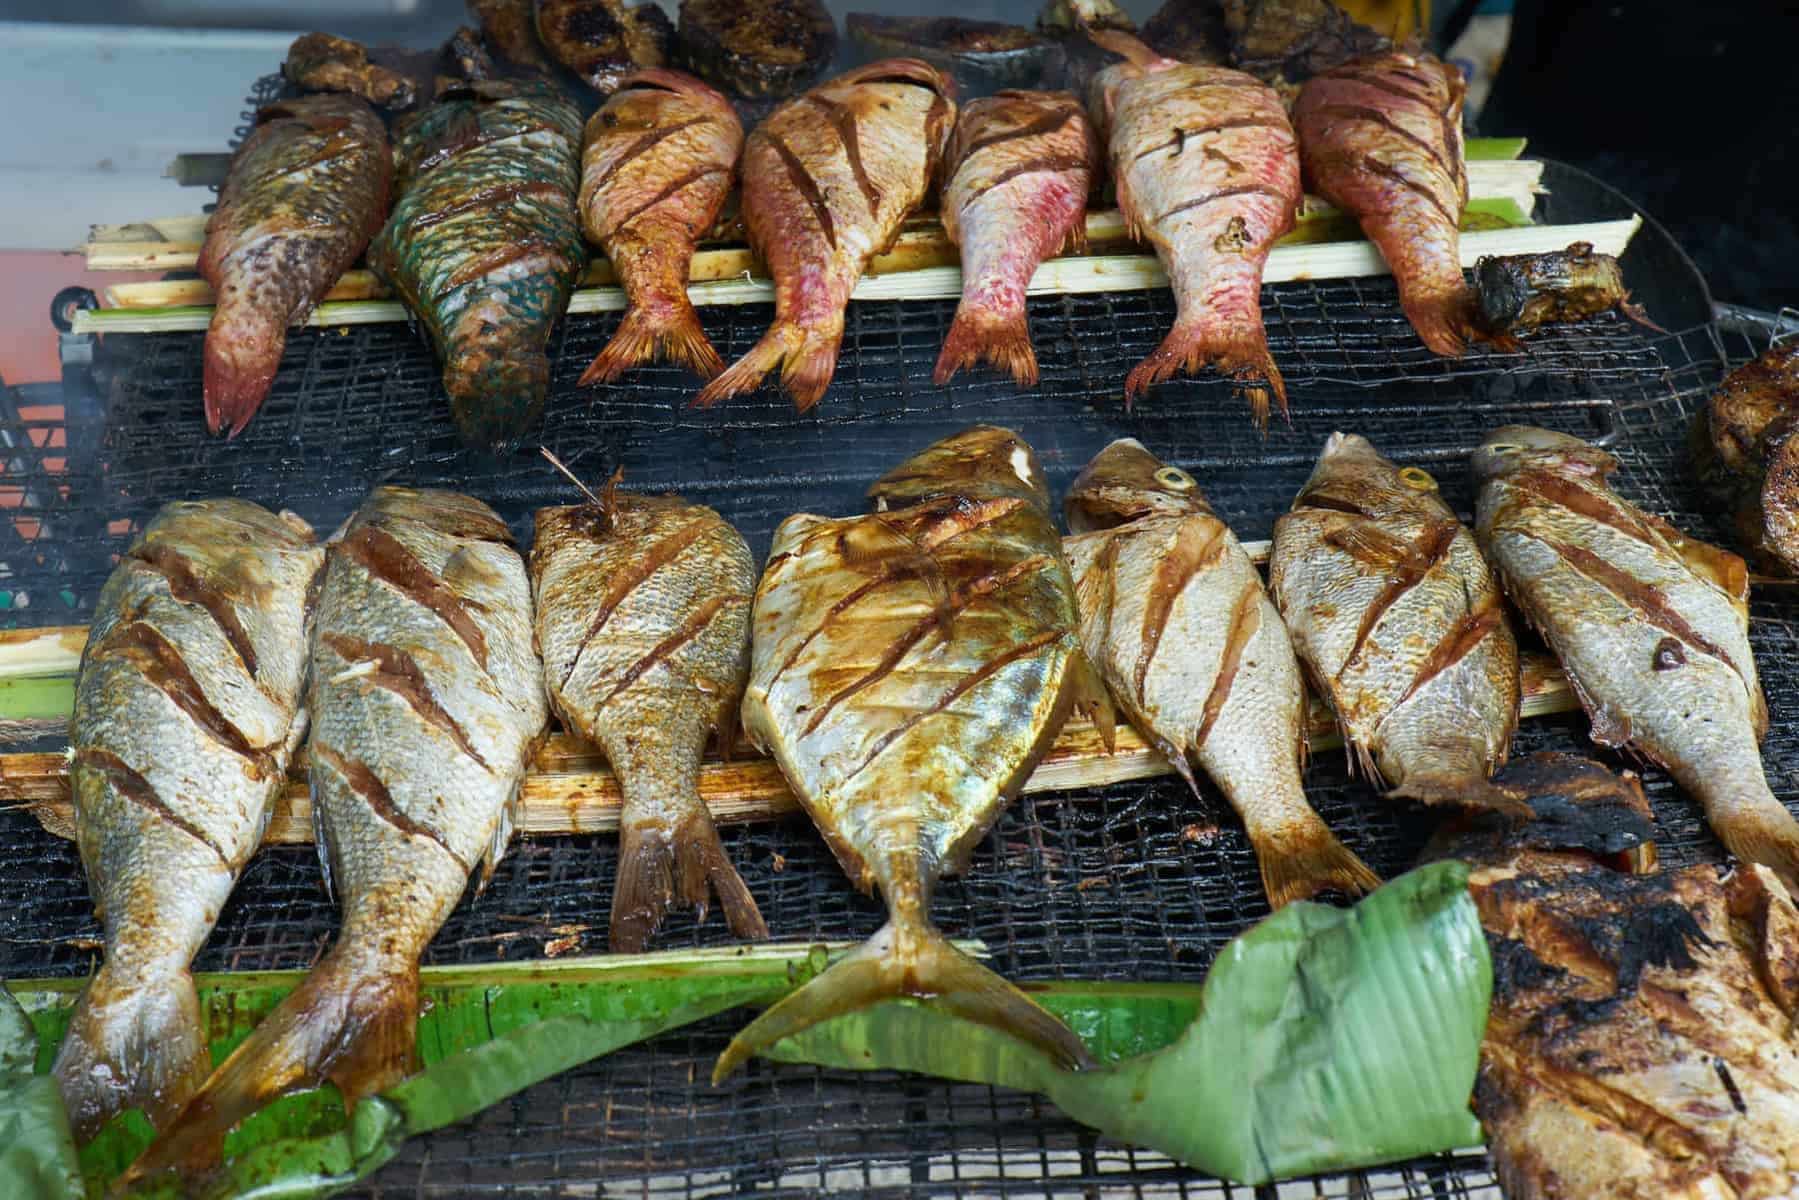 Grilled fresh seafood in local market, Mahé - Seychelles Island